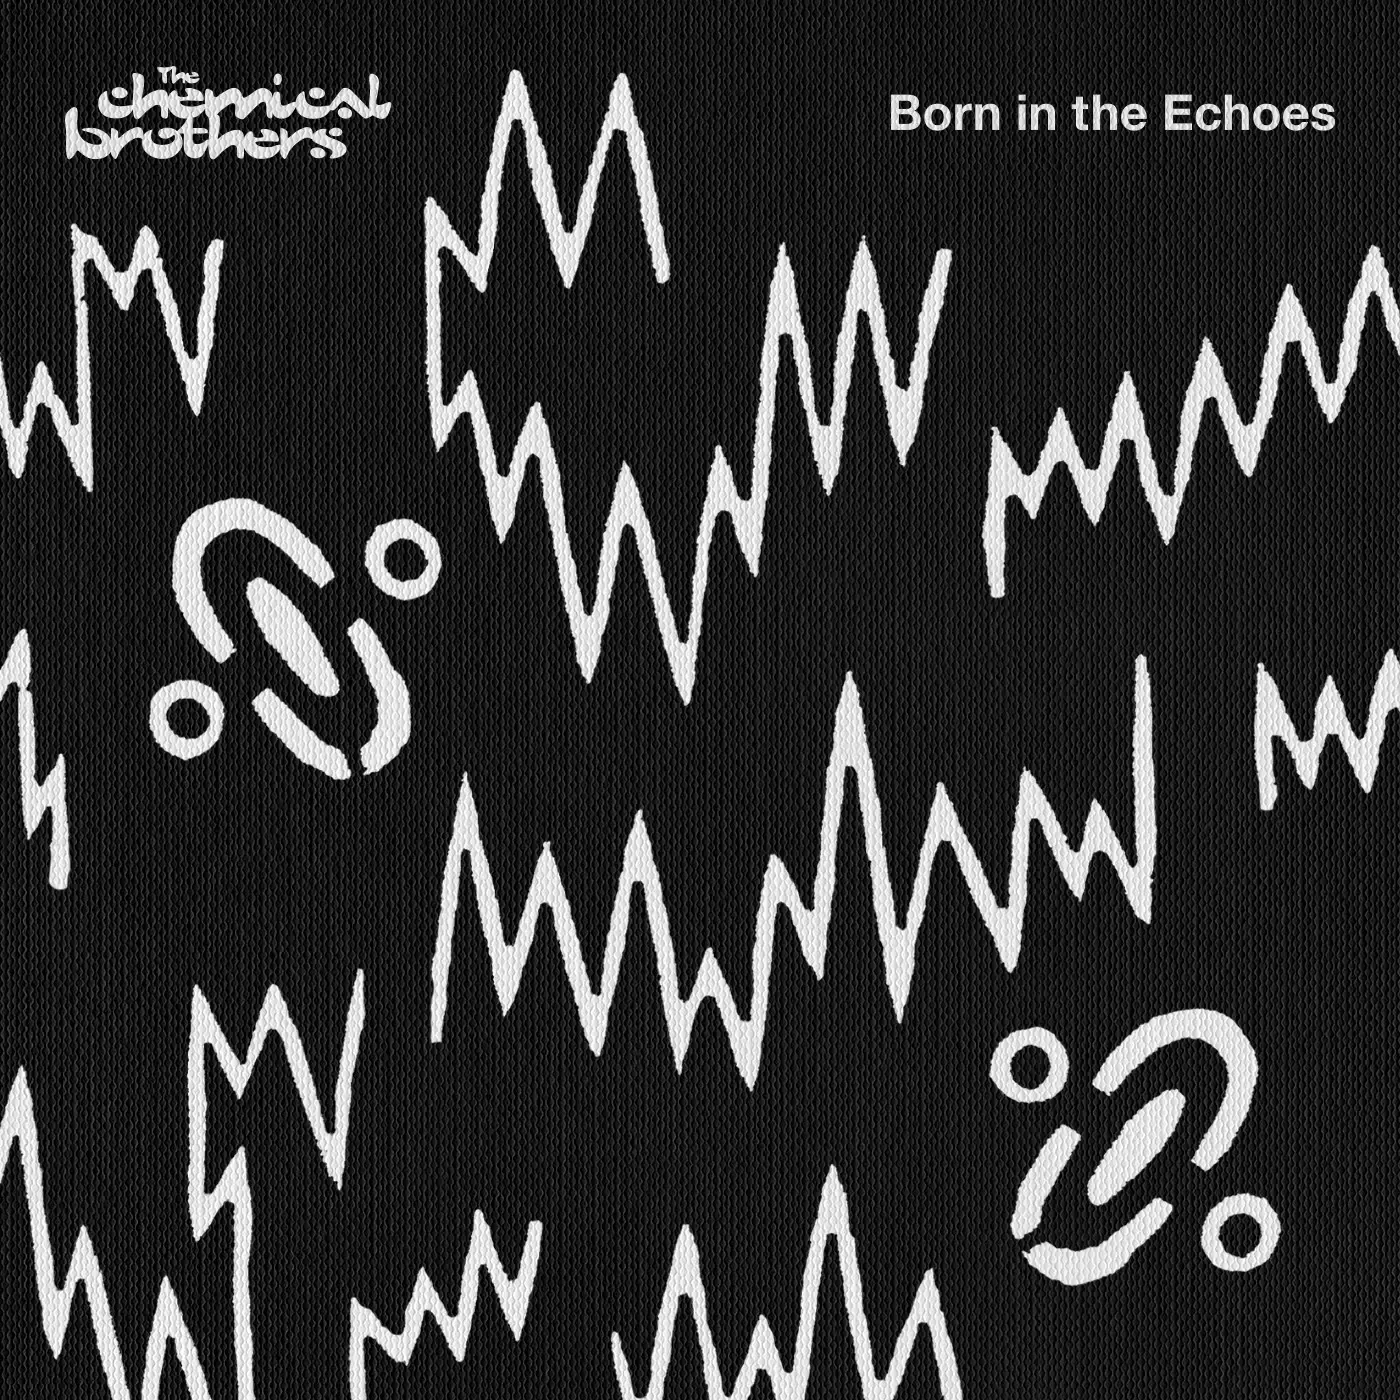 <strong>The Chemical Brothers - Born In The Echoes</strong> (Vinyl LP - black)